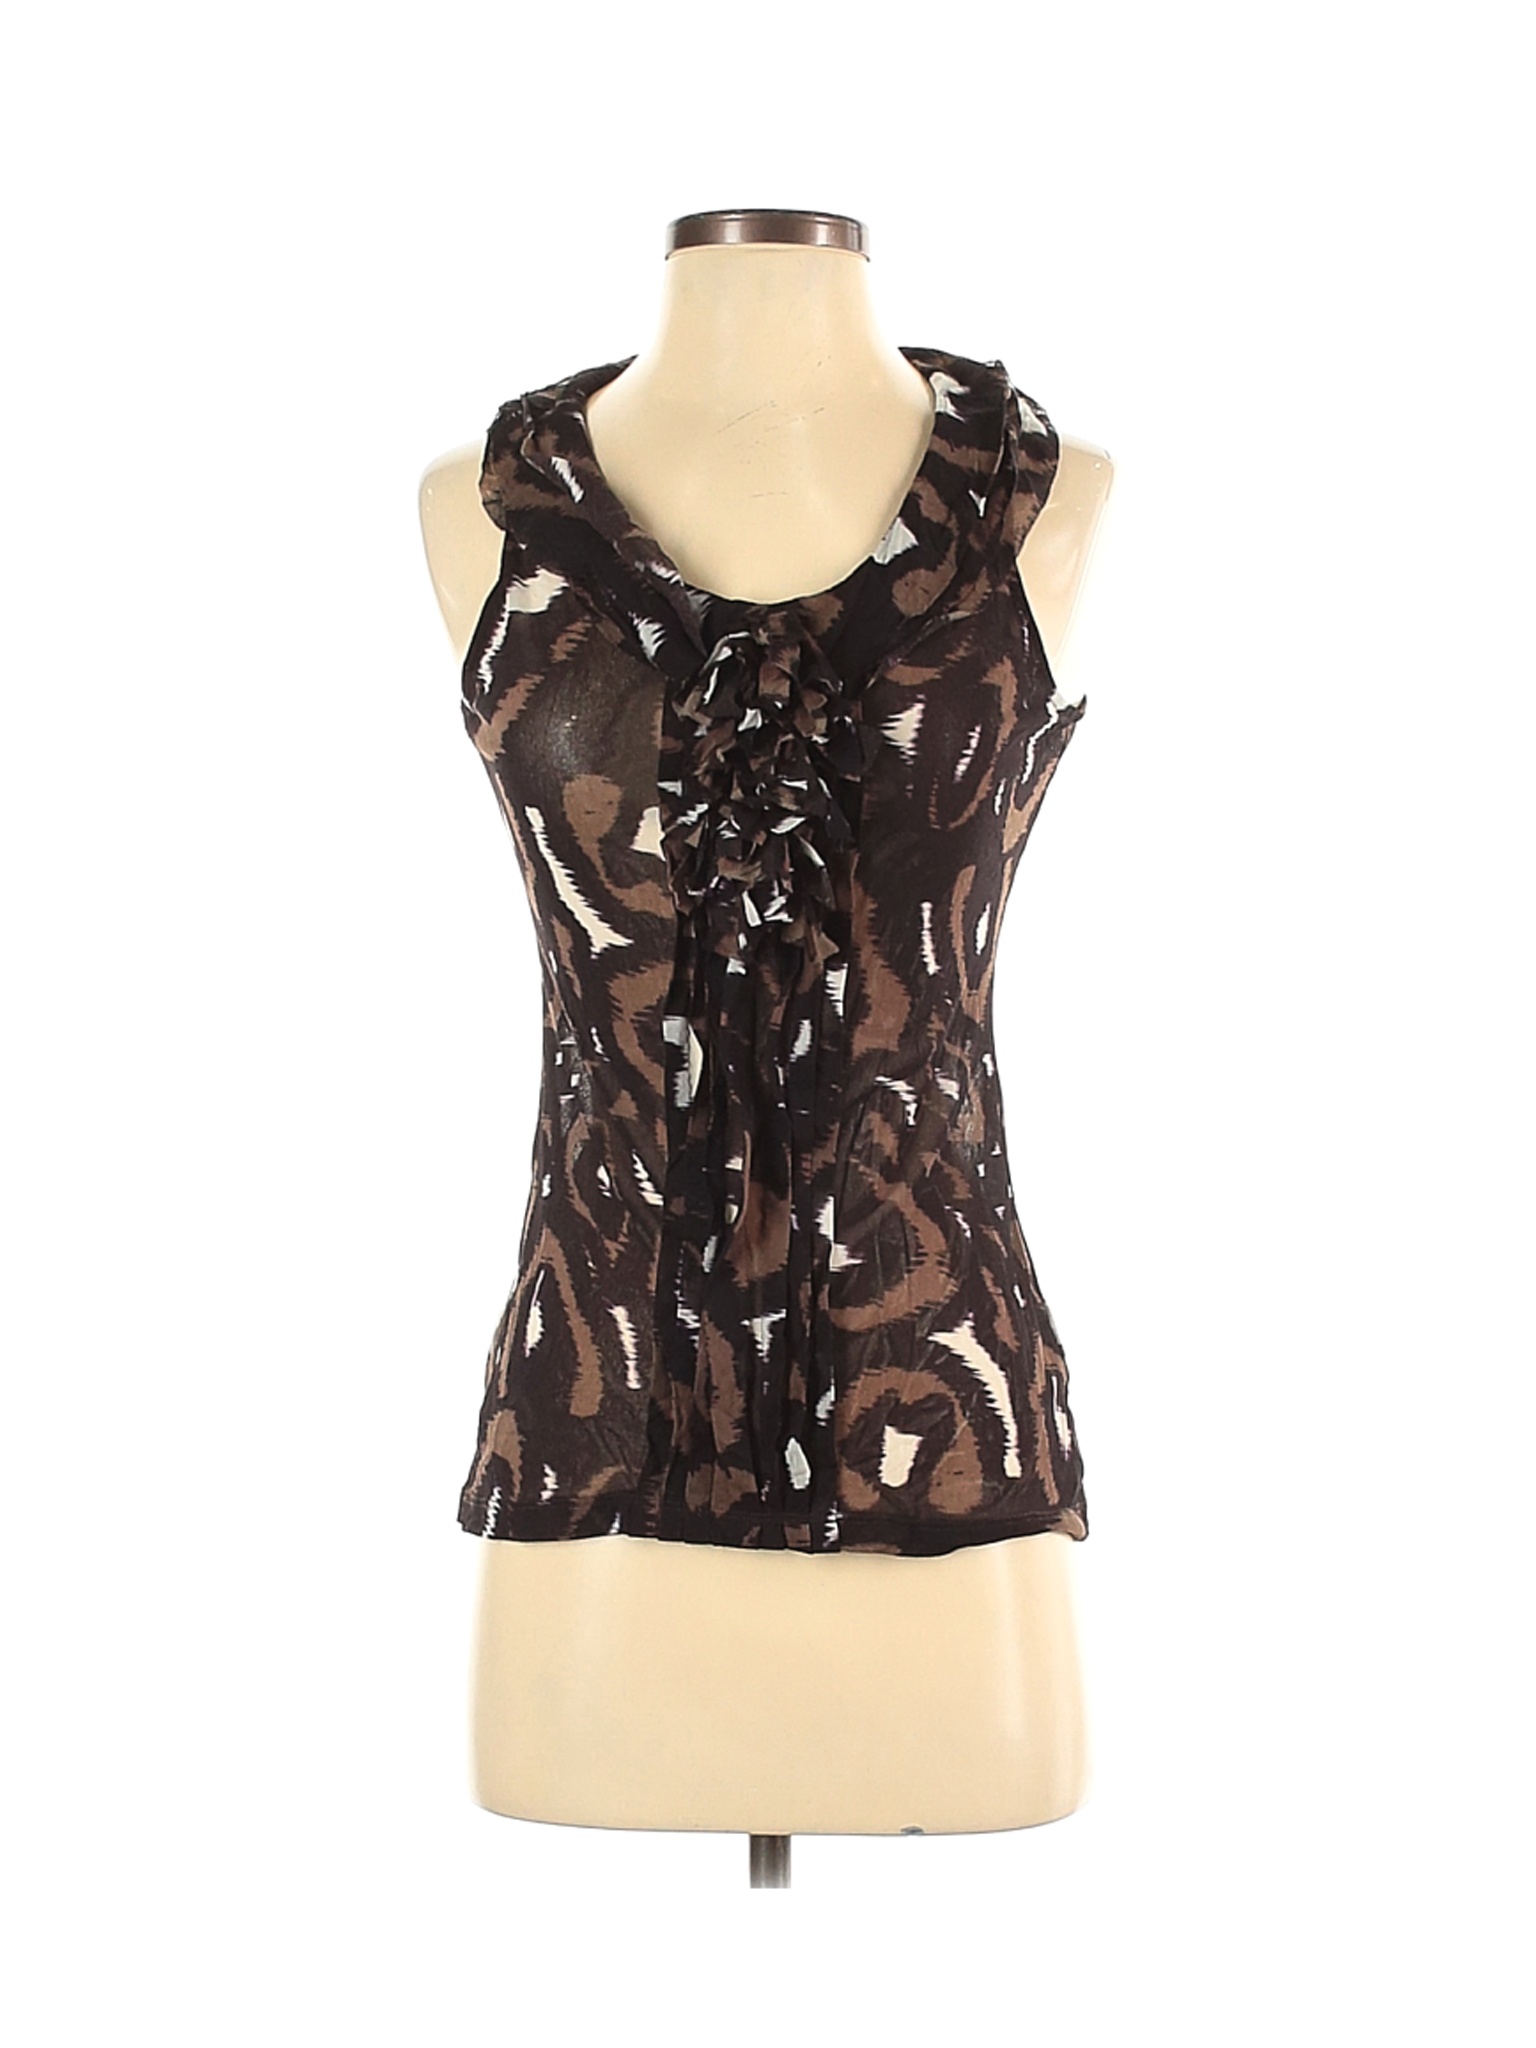 The Limited Women Brown Sleeveless Top S | eBay